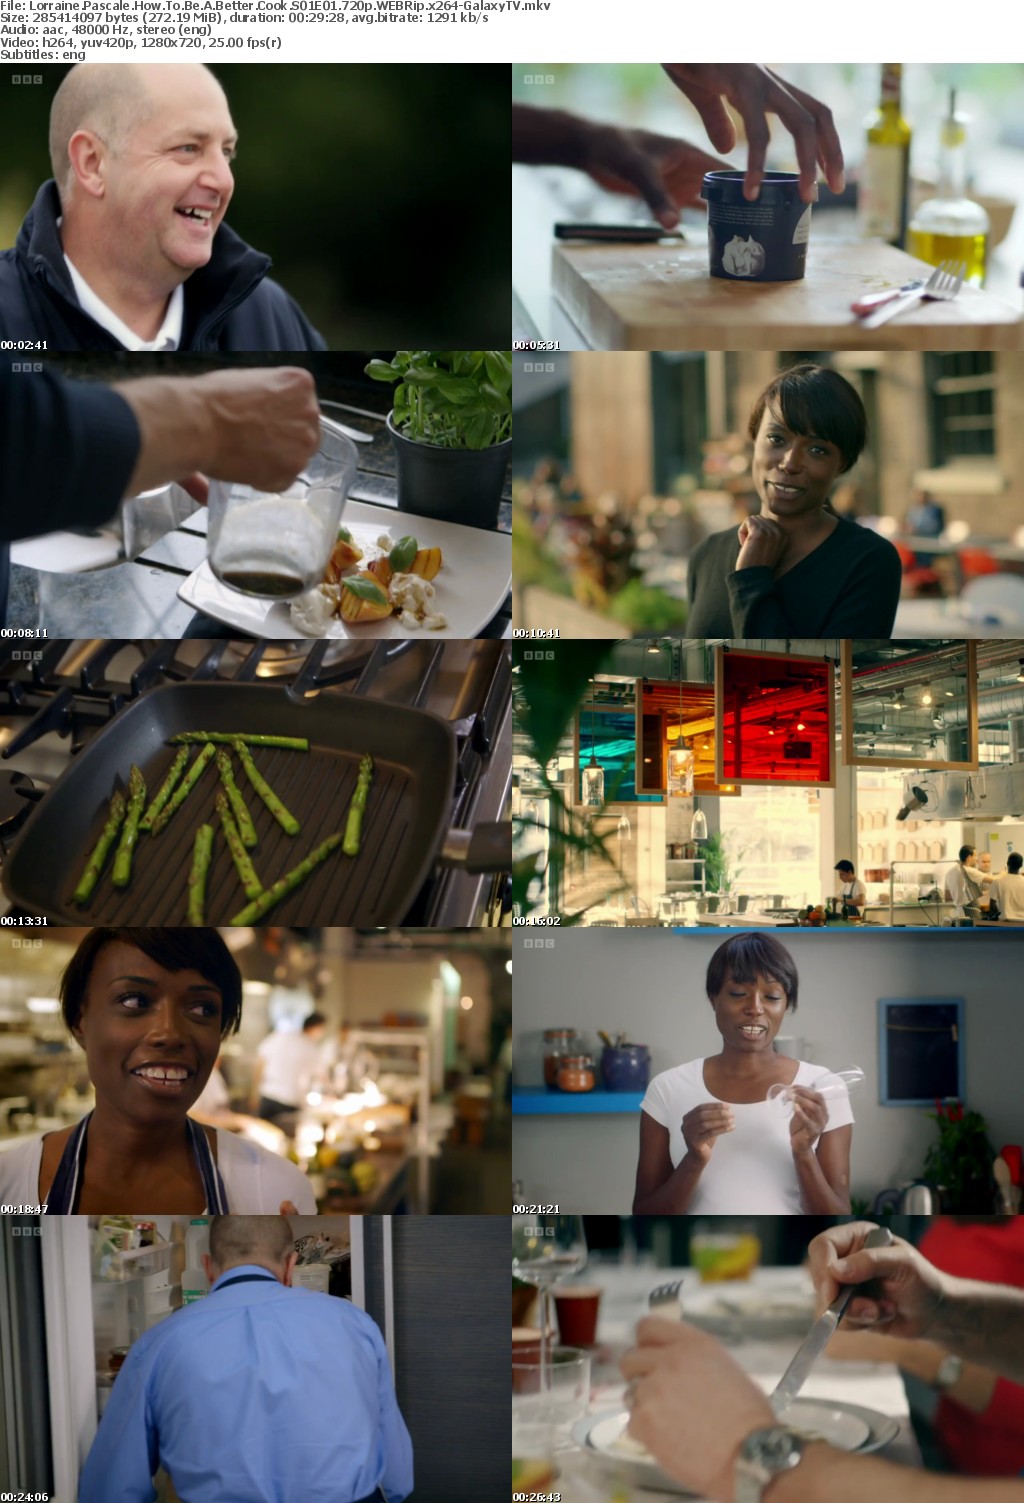 Lorraine Pascale How To Be A Better Cook S01 COMPLETE 720p WEBRip x264-GalaxyTV